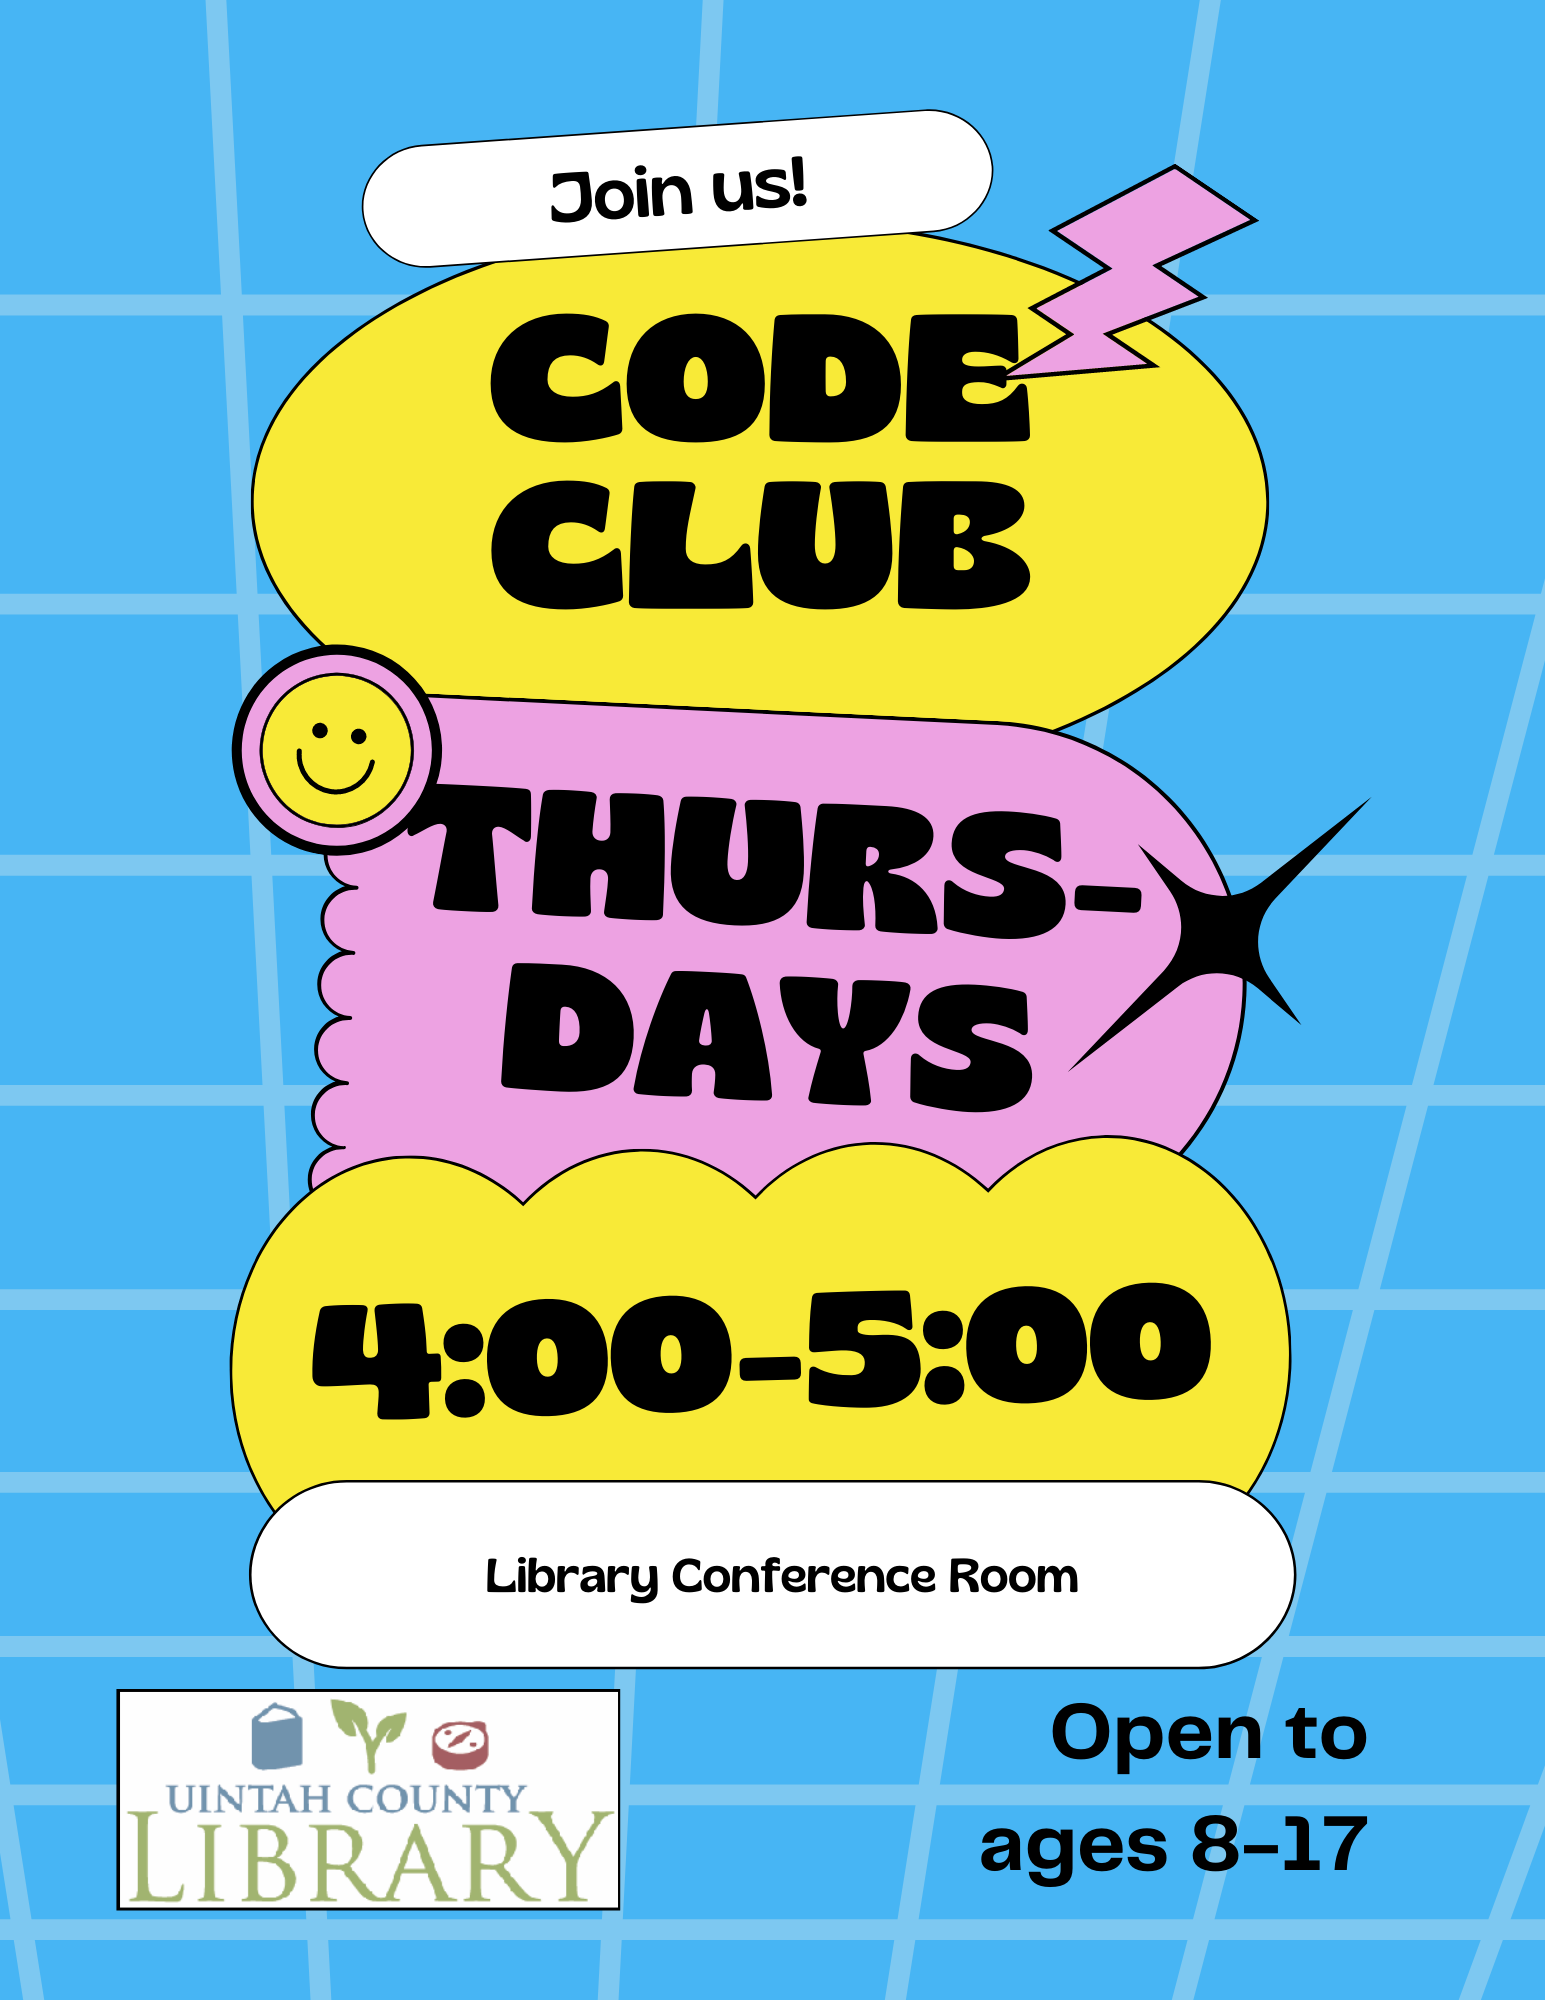 Code Club Thursdays 4:00-5:00 Library Conference Room